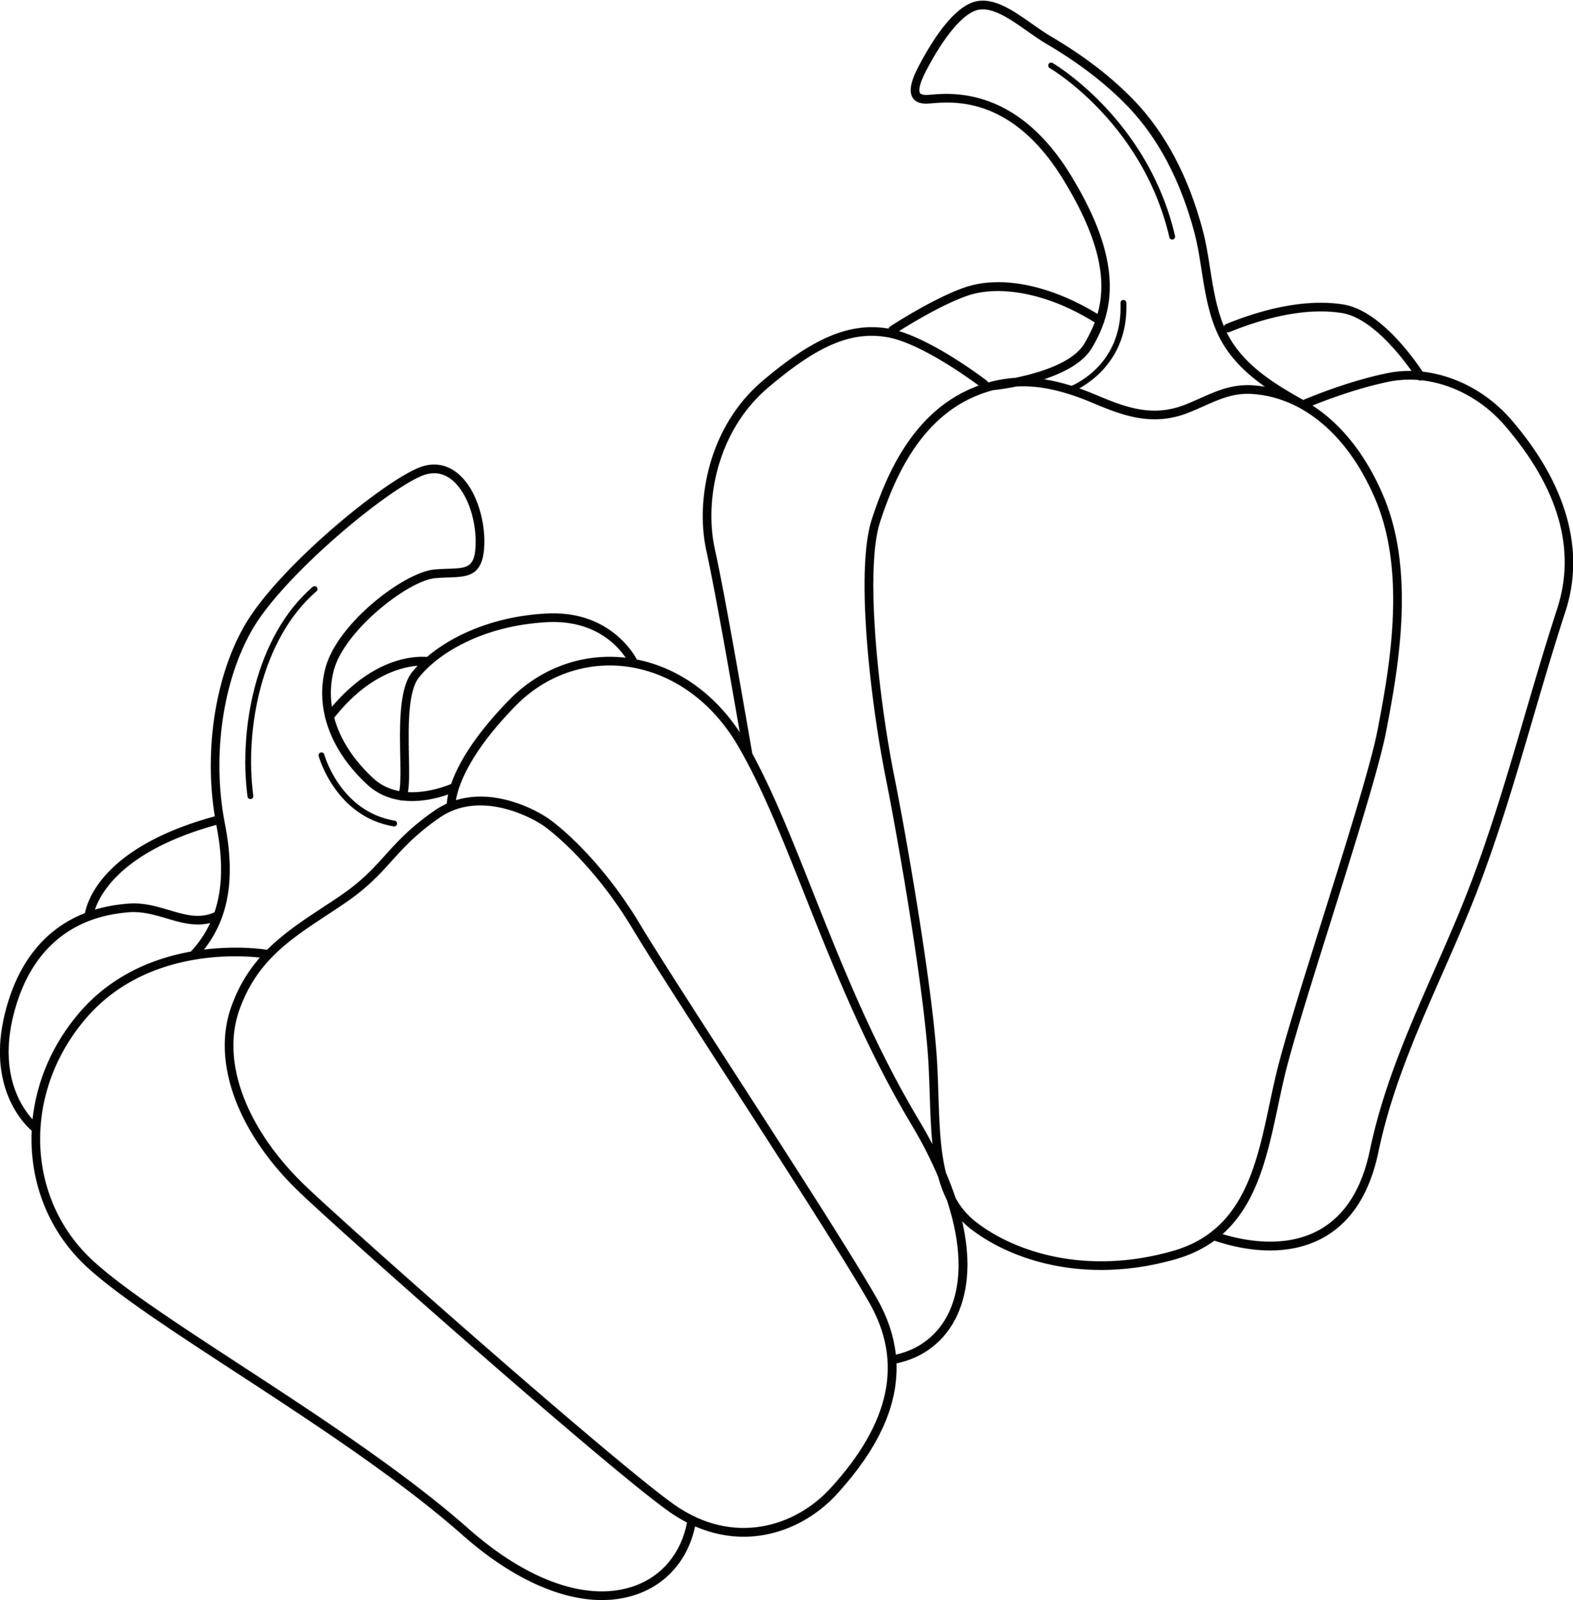 A cute and funny coloring page of bell pepper. Provides hours of coloring fun for children. Color, this page is very easy. Suitable for little kids and toddlers.